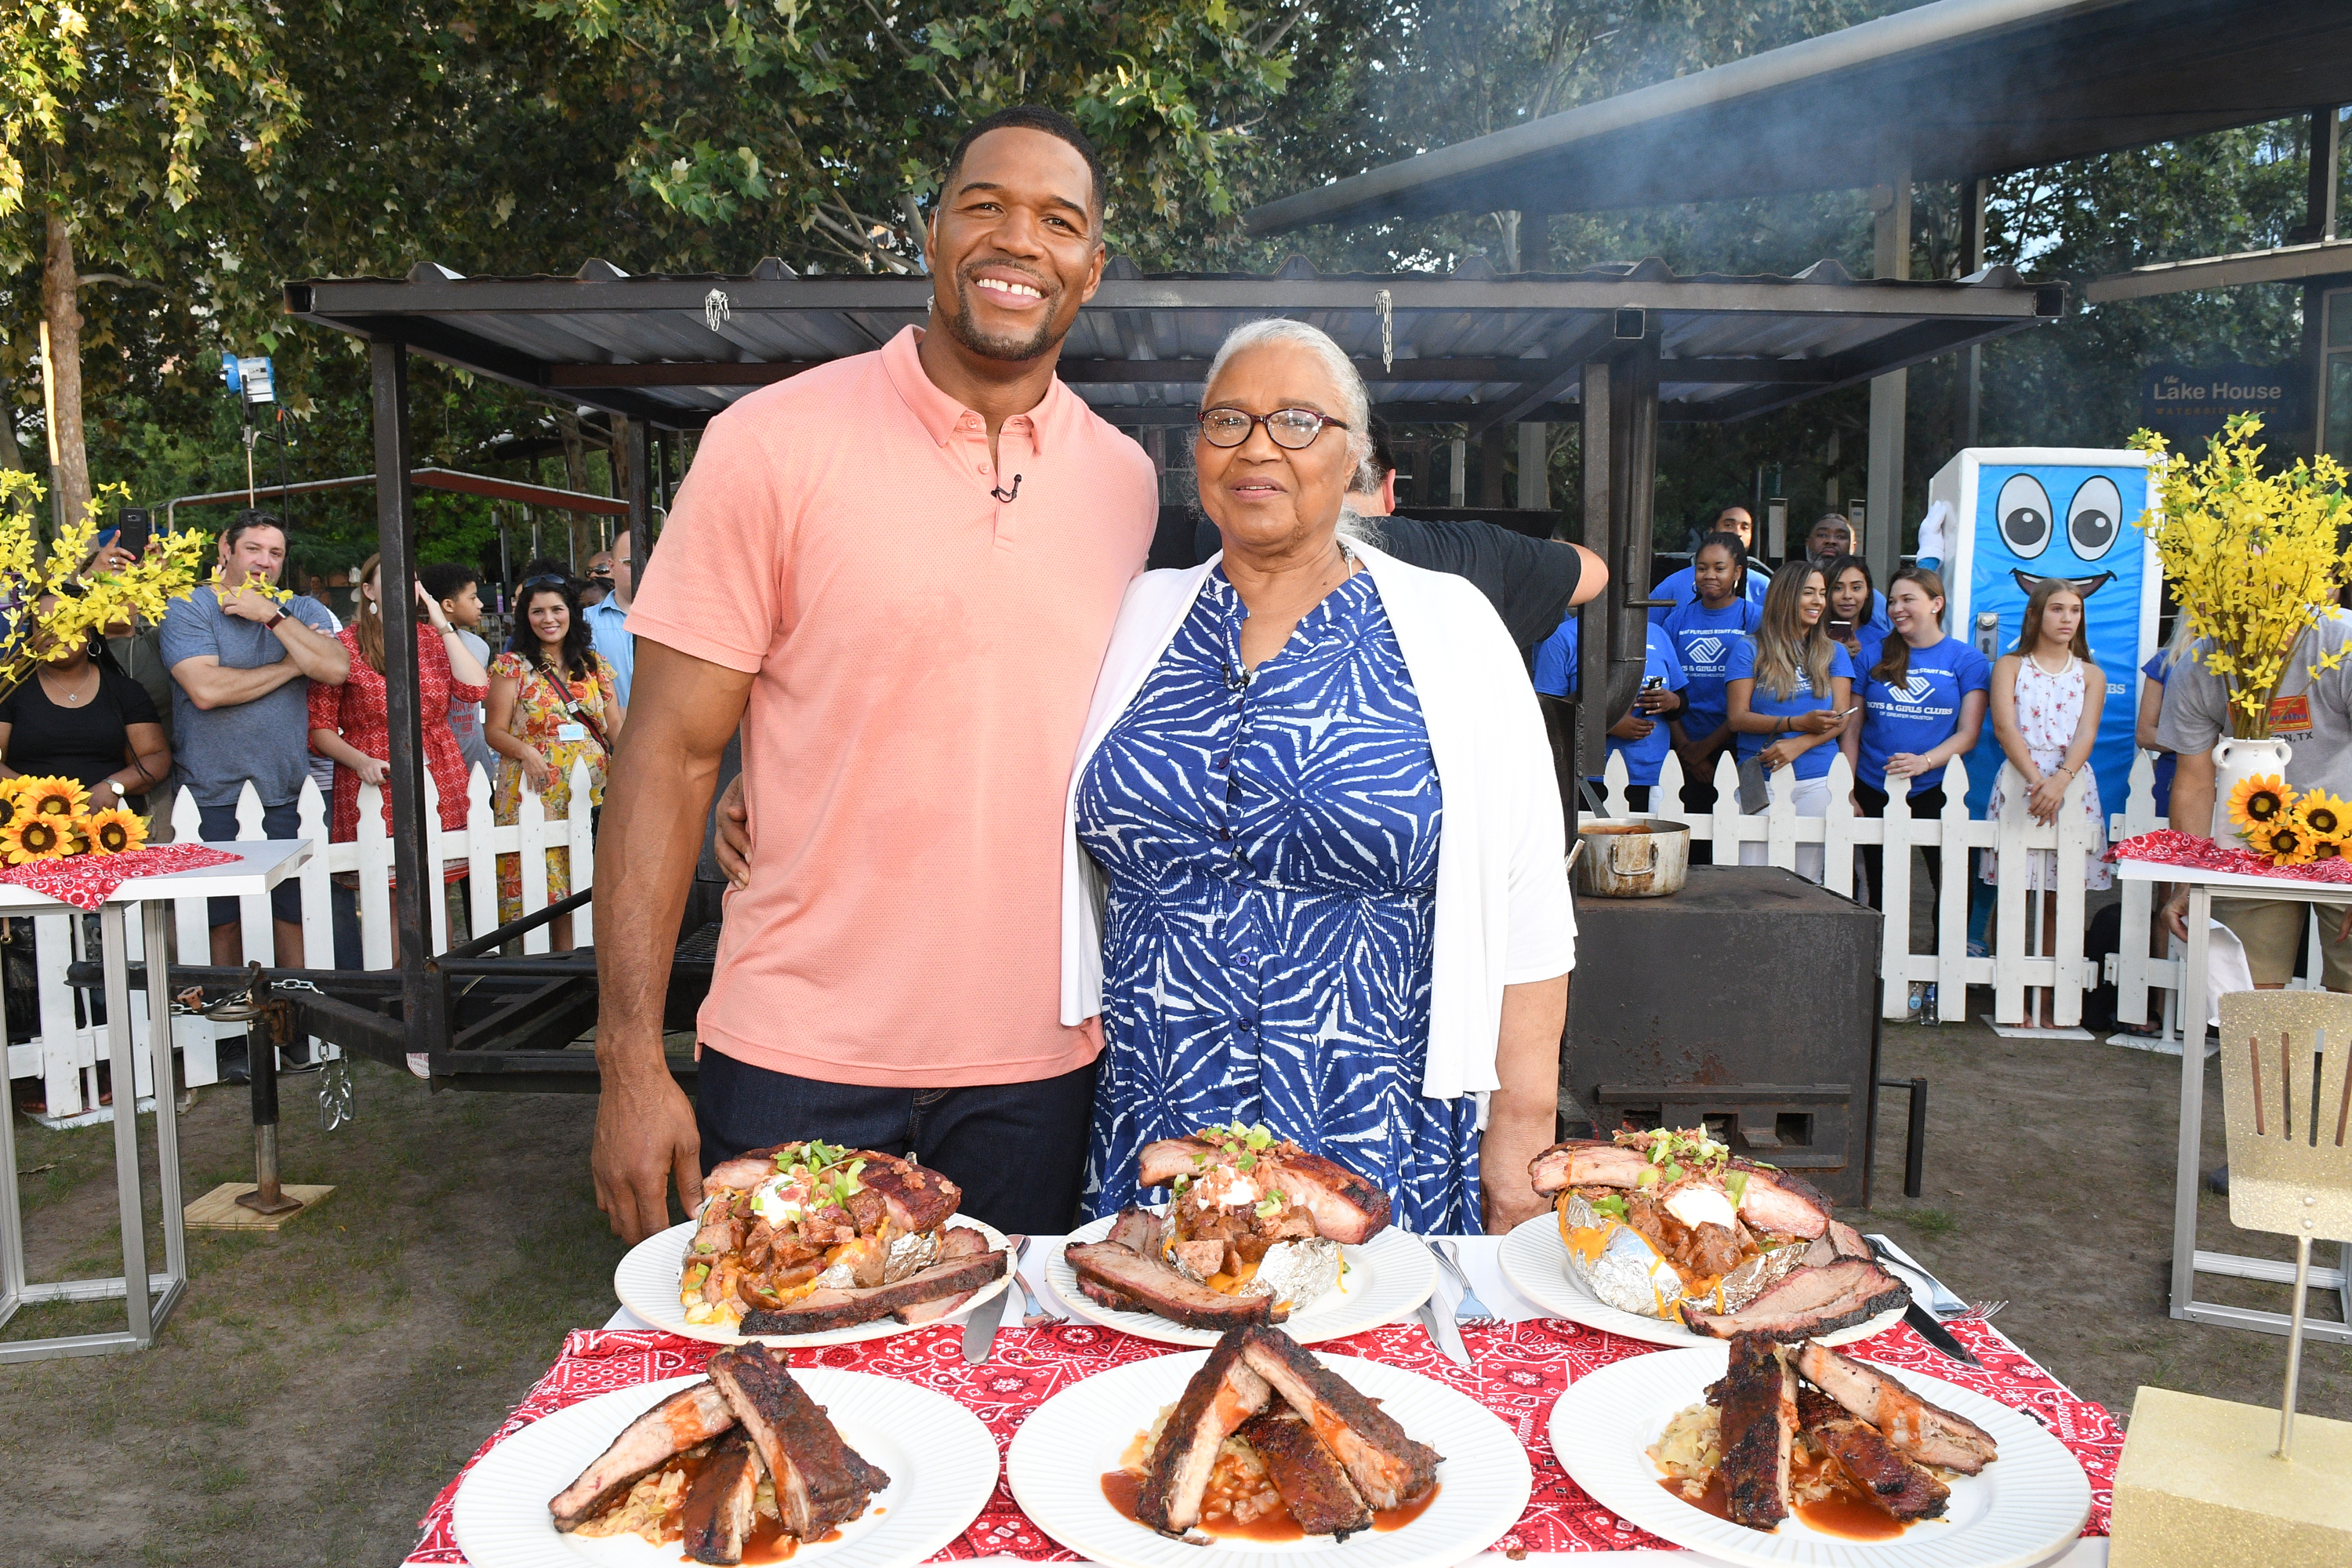 Michael and Louise Strahan during a "Good Morning America" broadcast segment in Houston, Texas on July 10, 2019 | Source: Getty Images